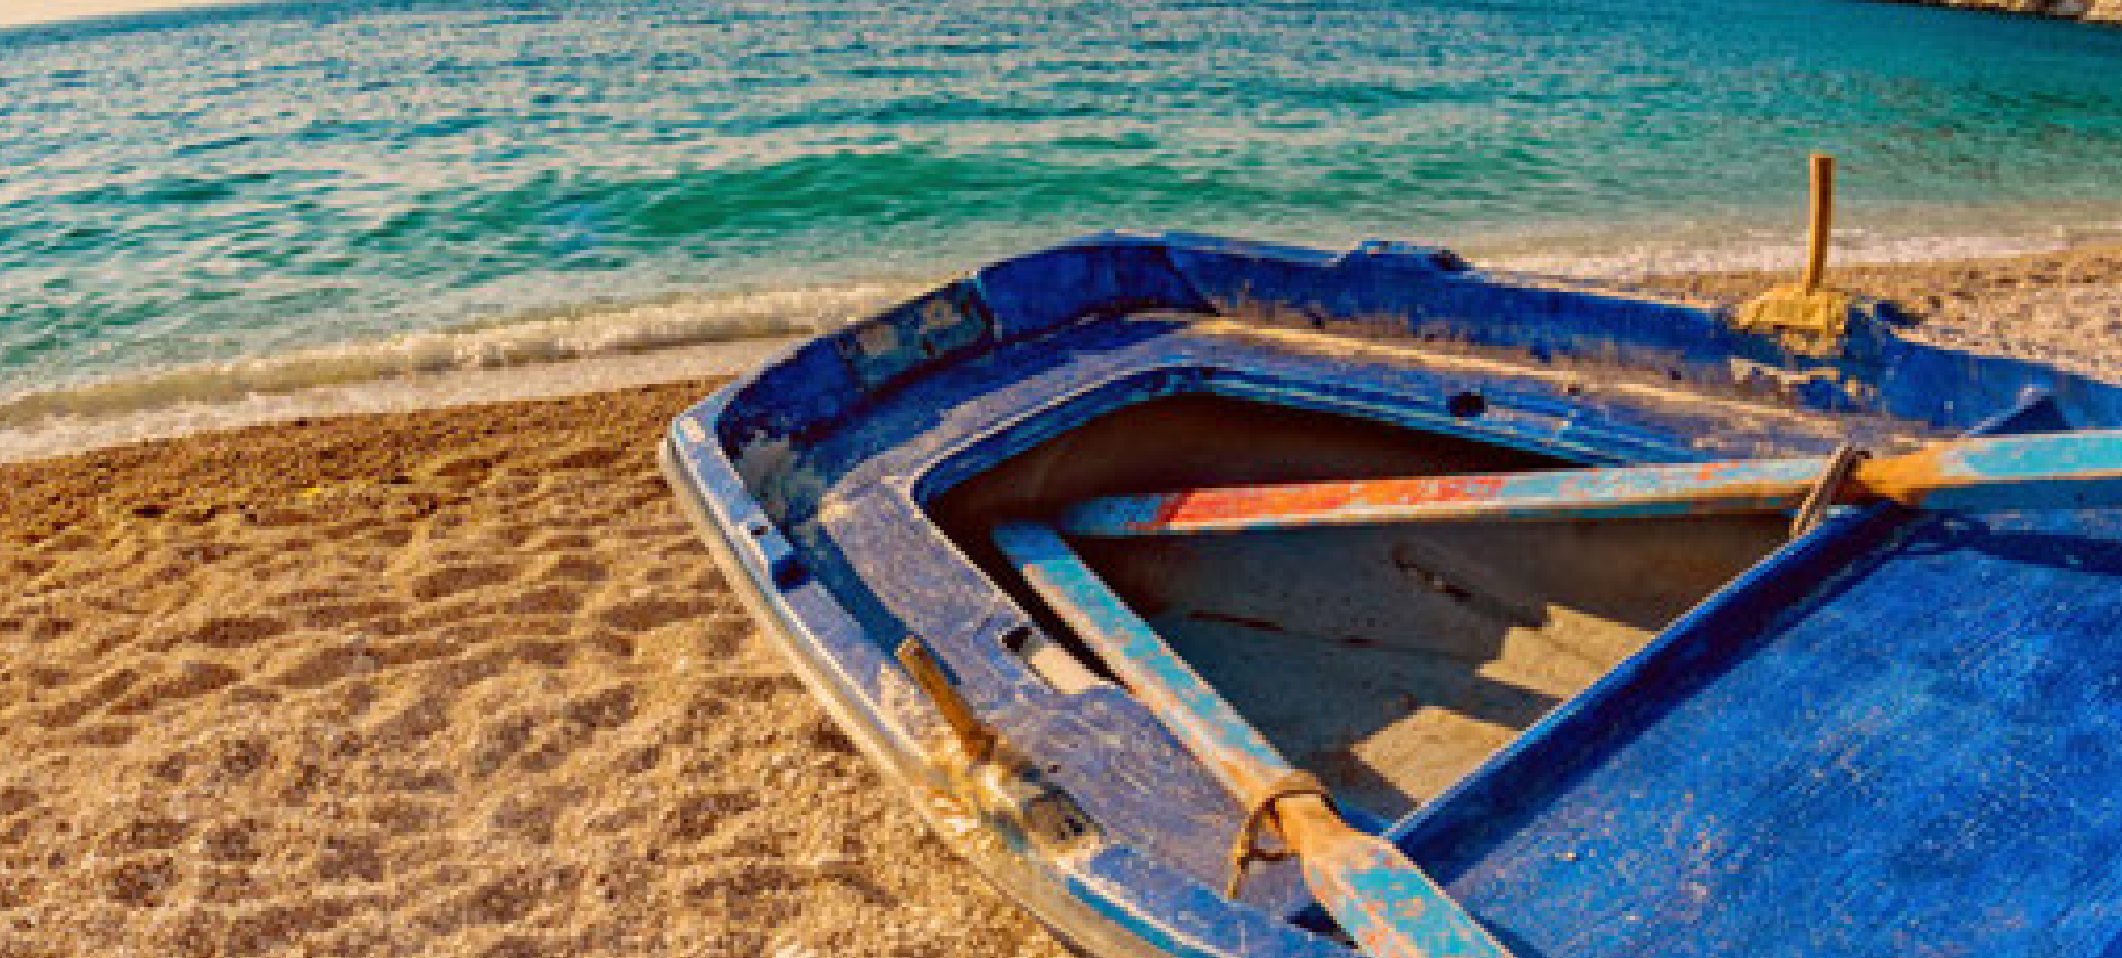 Image of boat on a beach